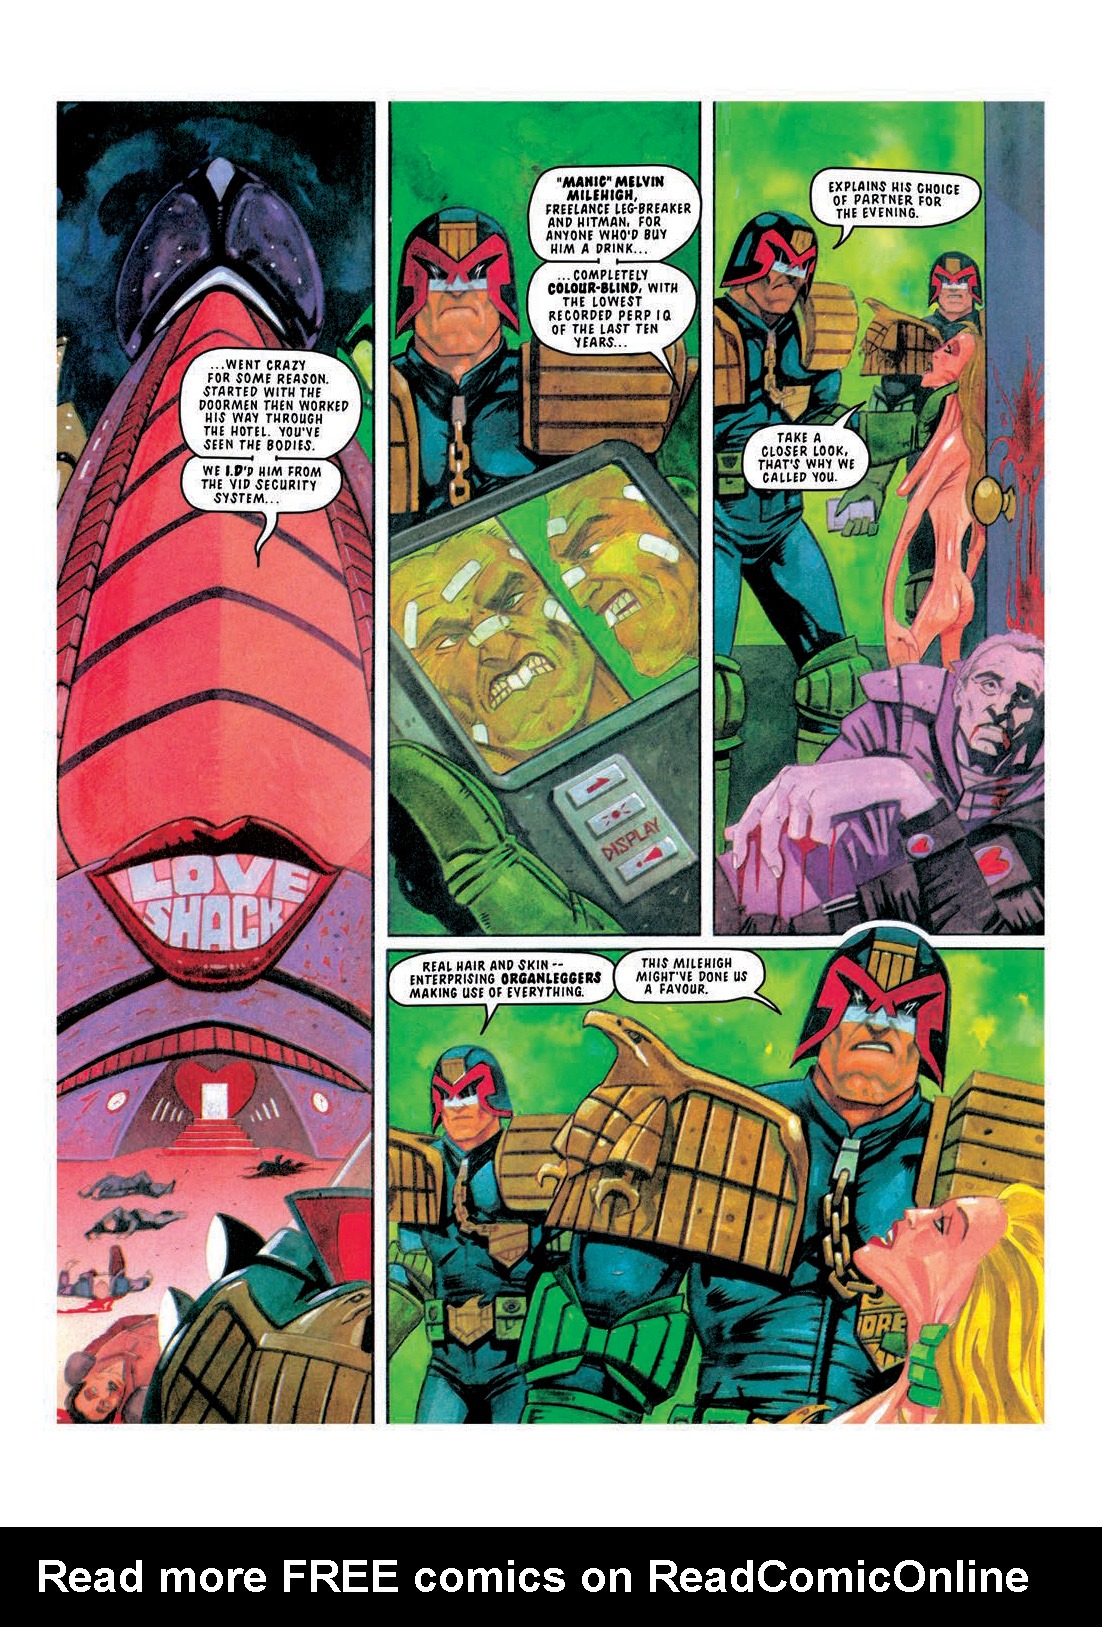 Read online Judge Dredd: The Restricted Files comic -  Issue # TPB 4 - 25